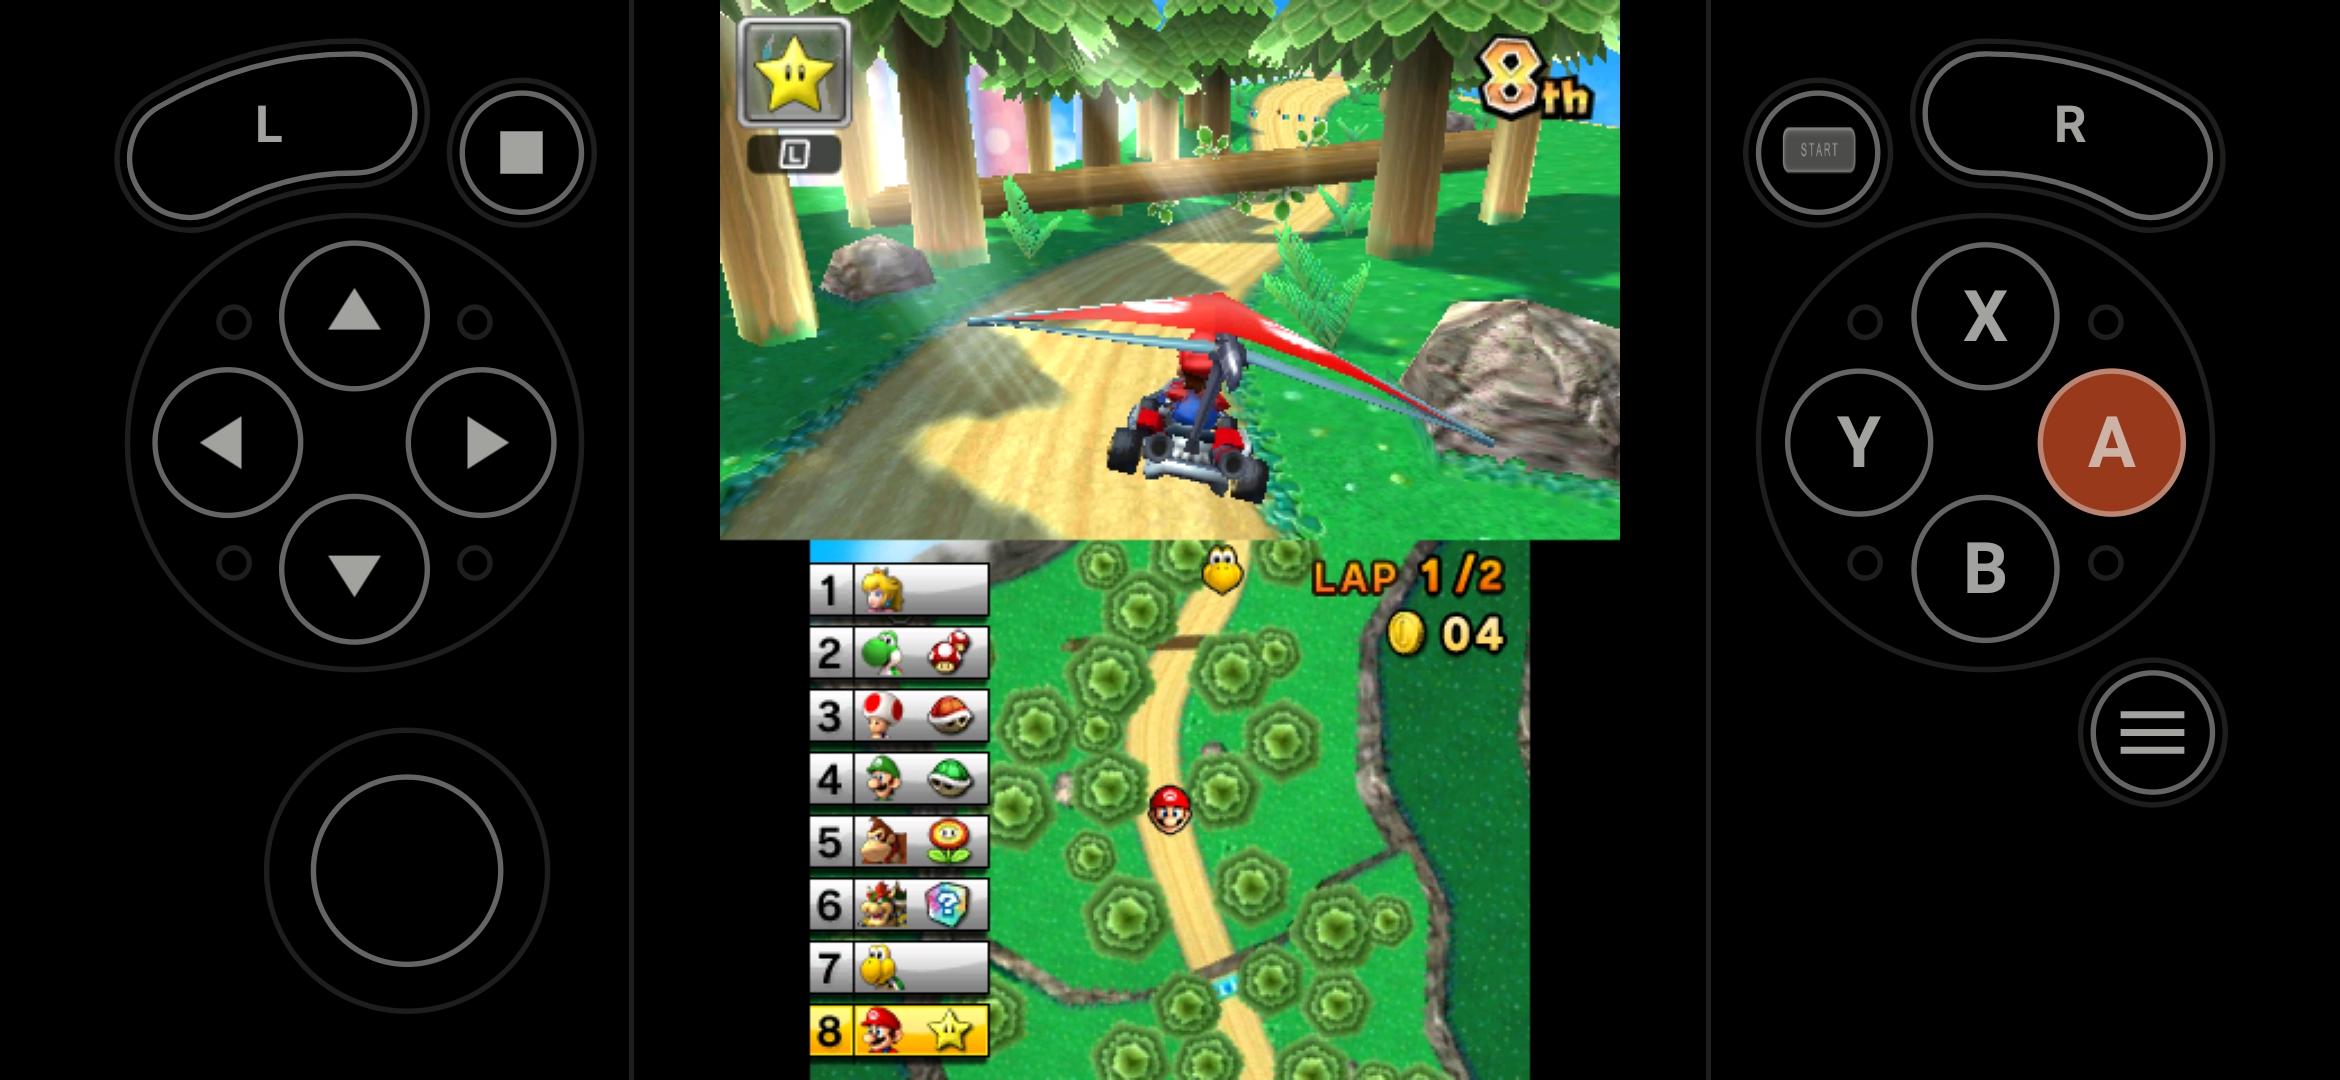 Download 3DS Emulator android on